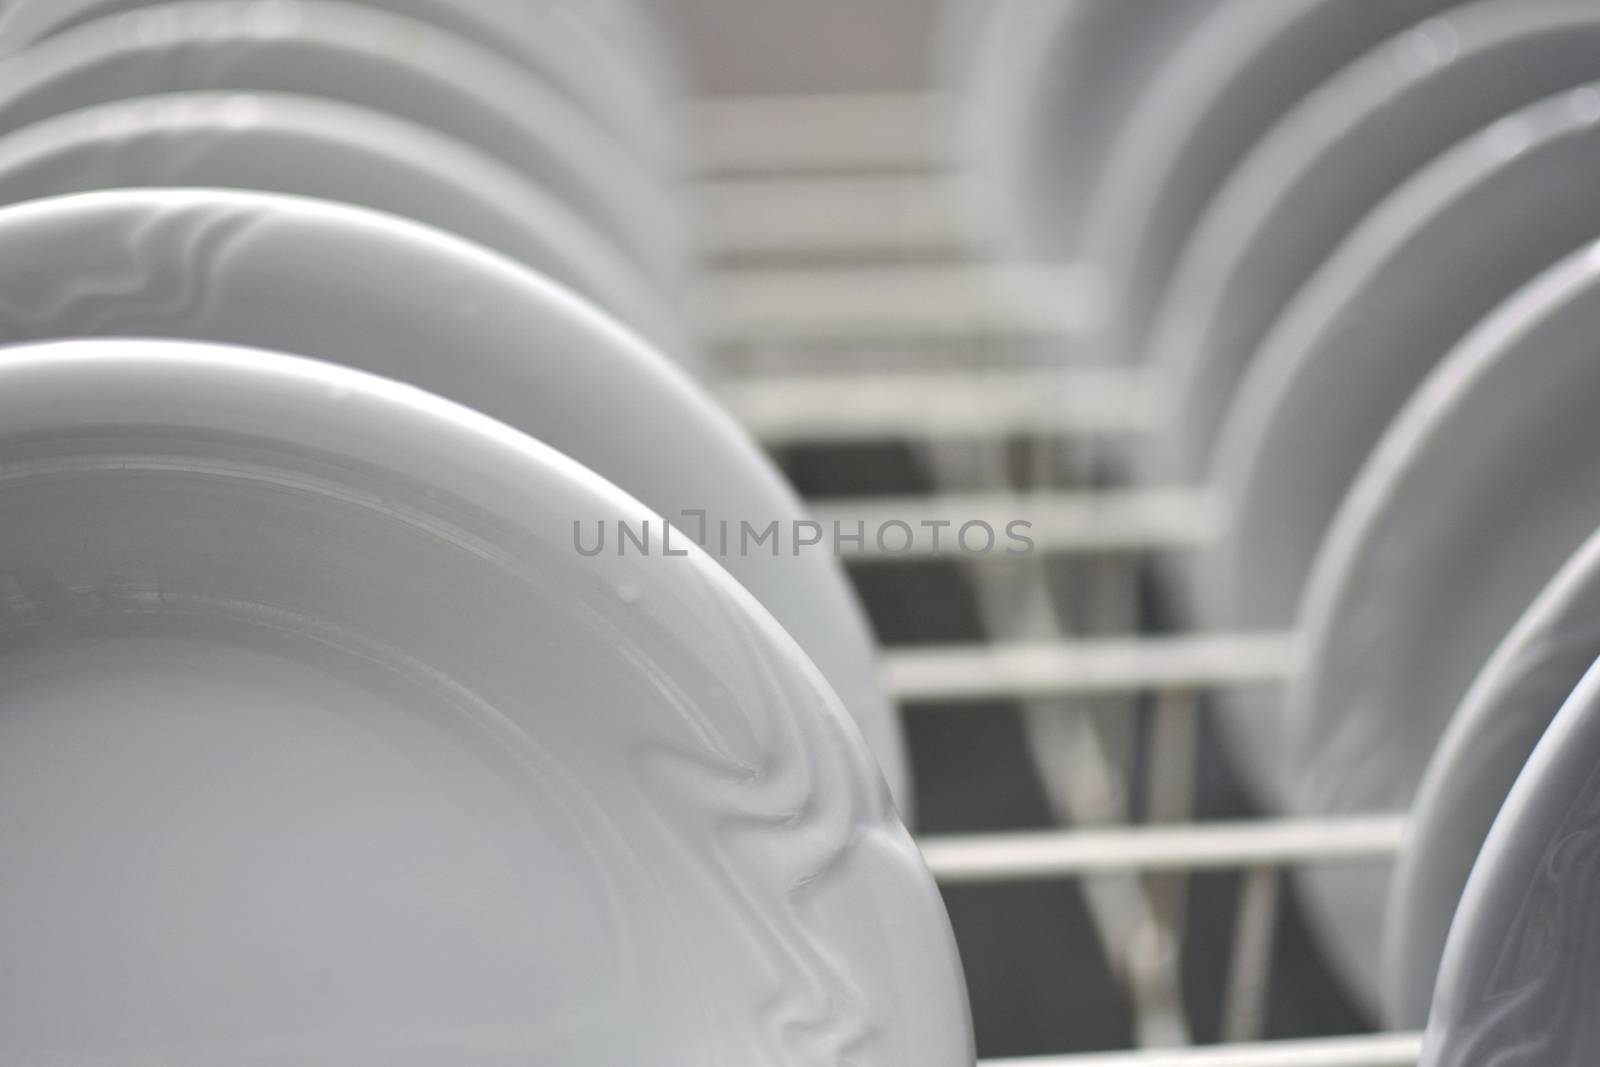 Stacked dishes by photosampler